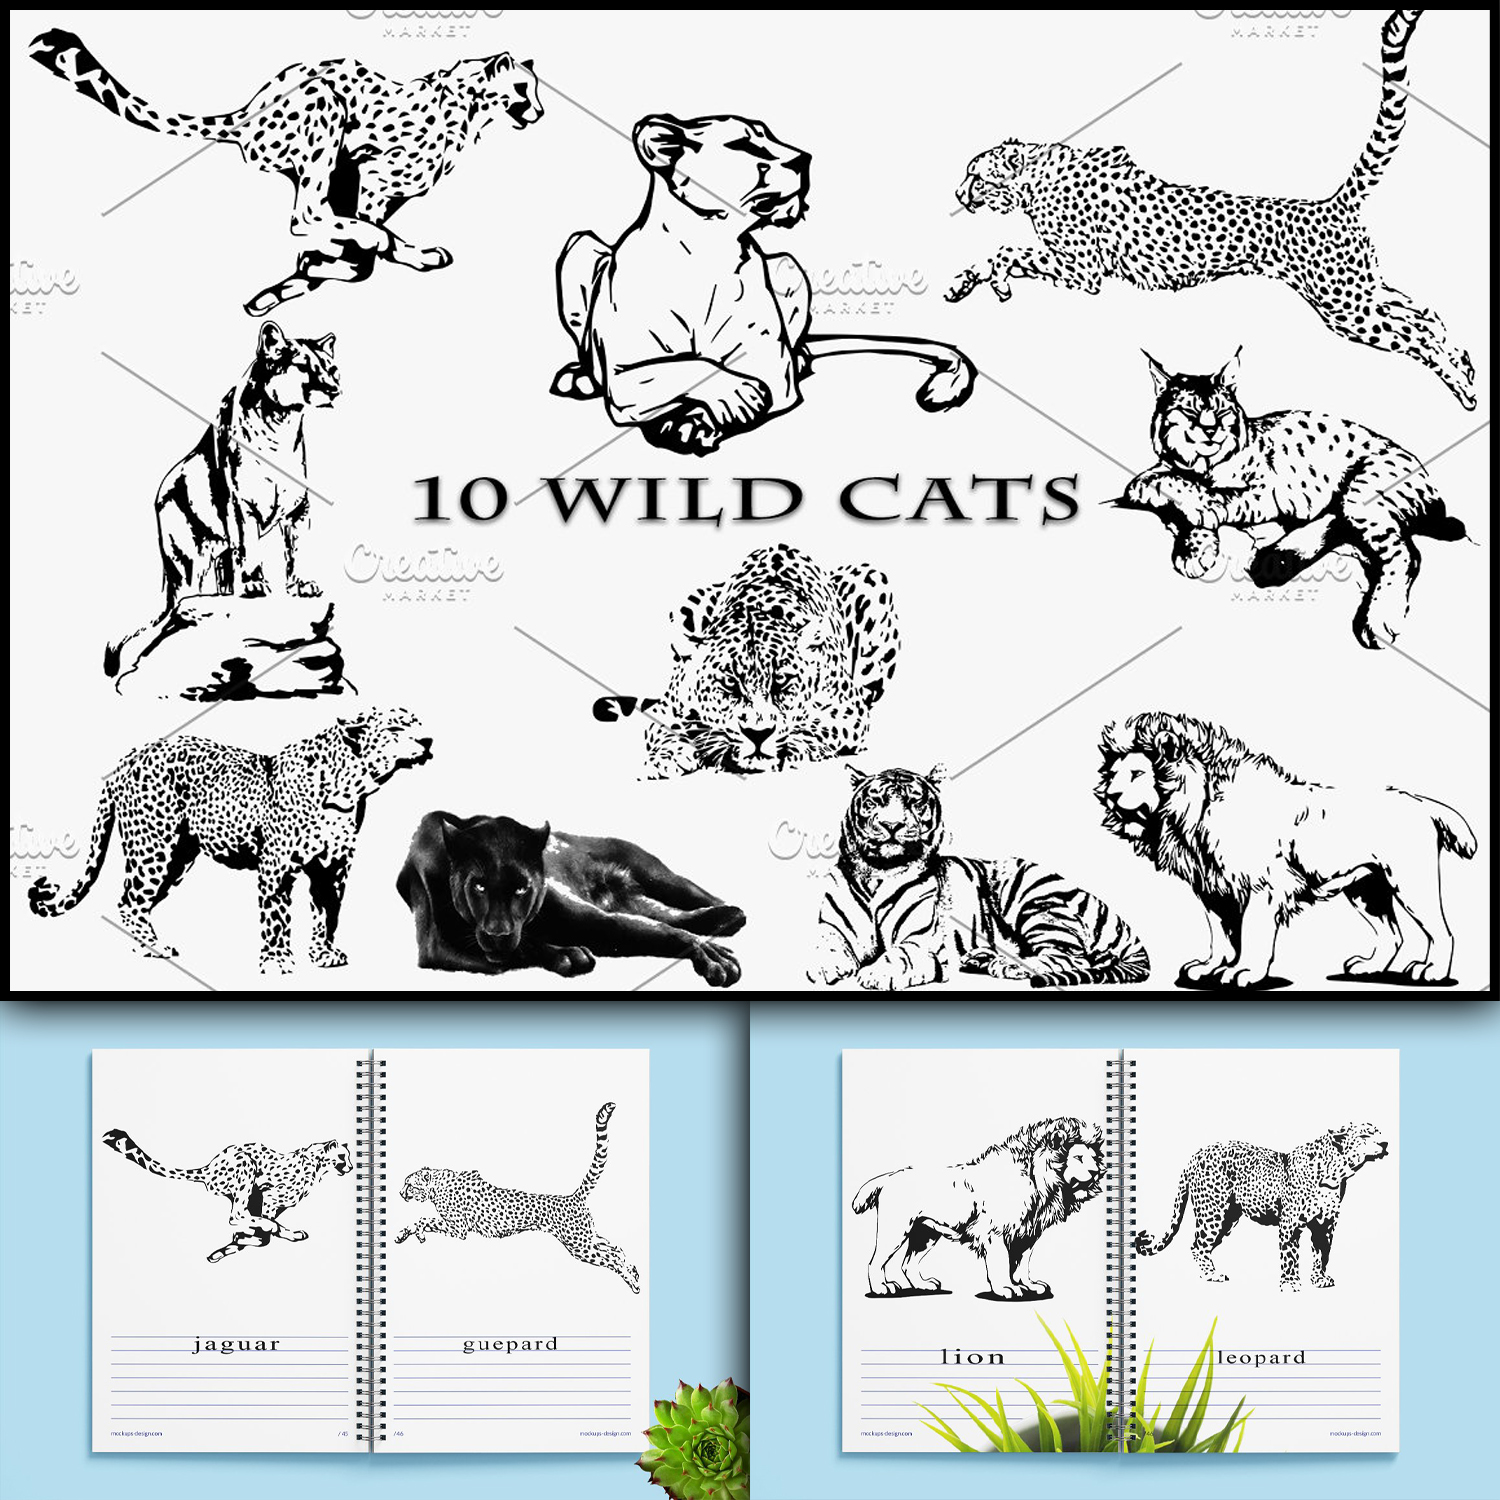 Images with wild cat family. vector illustration.